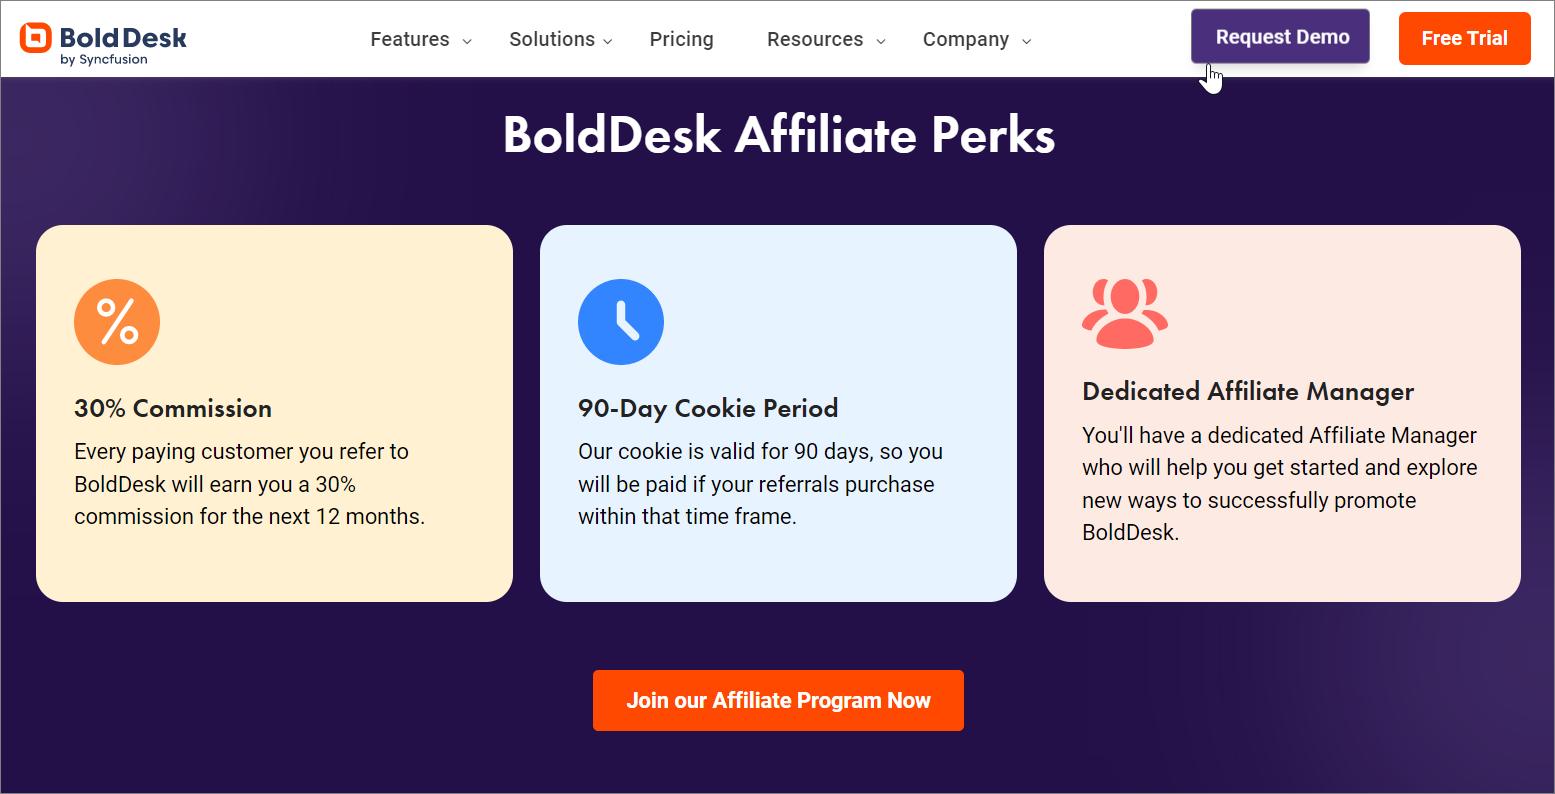 BoldDesk Affiliate - table showing some of the perks